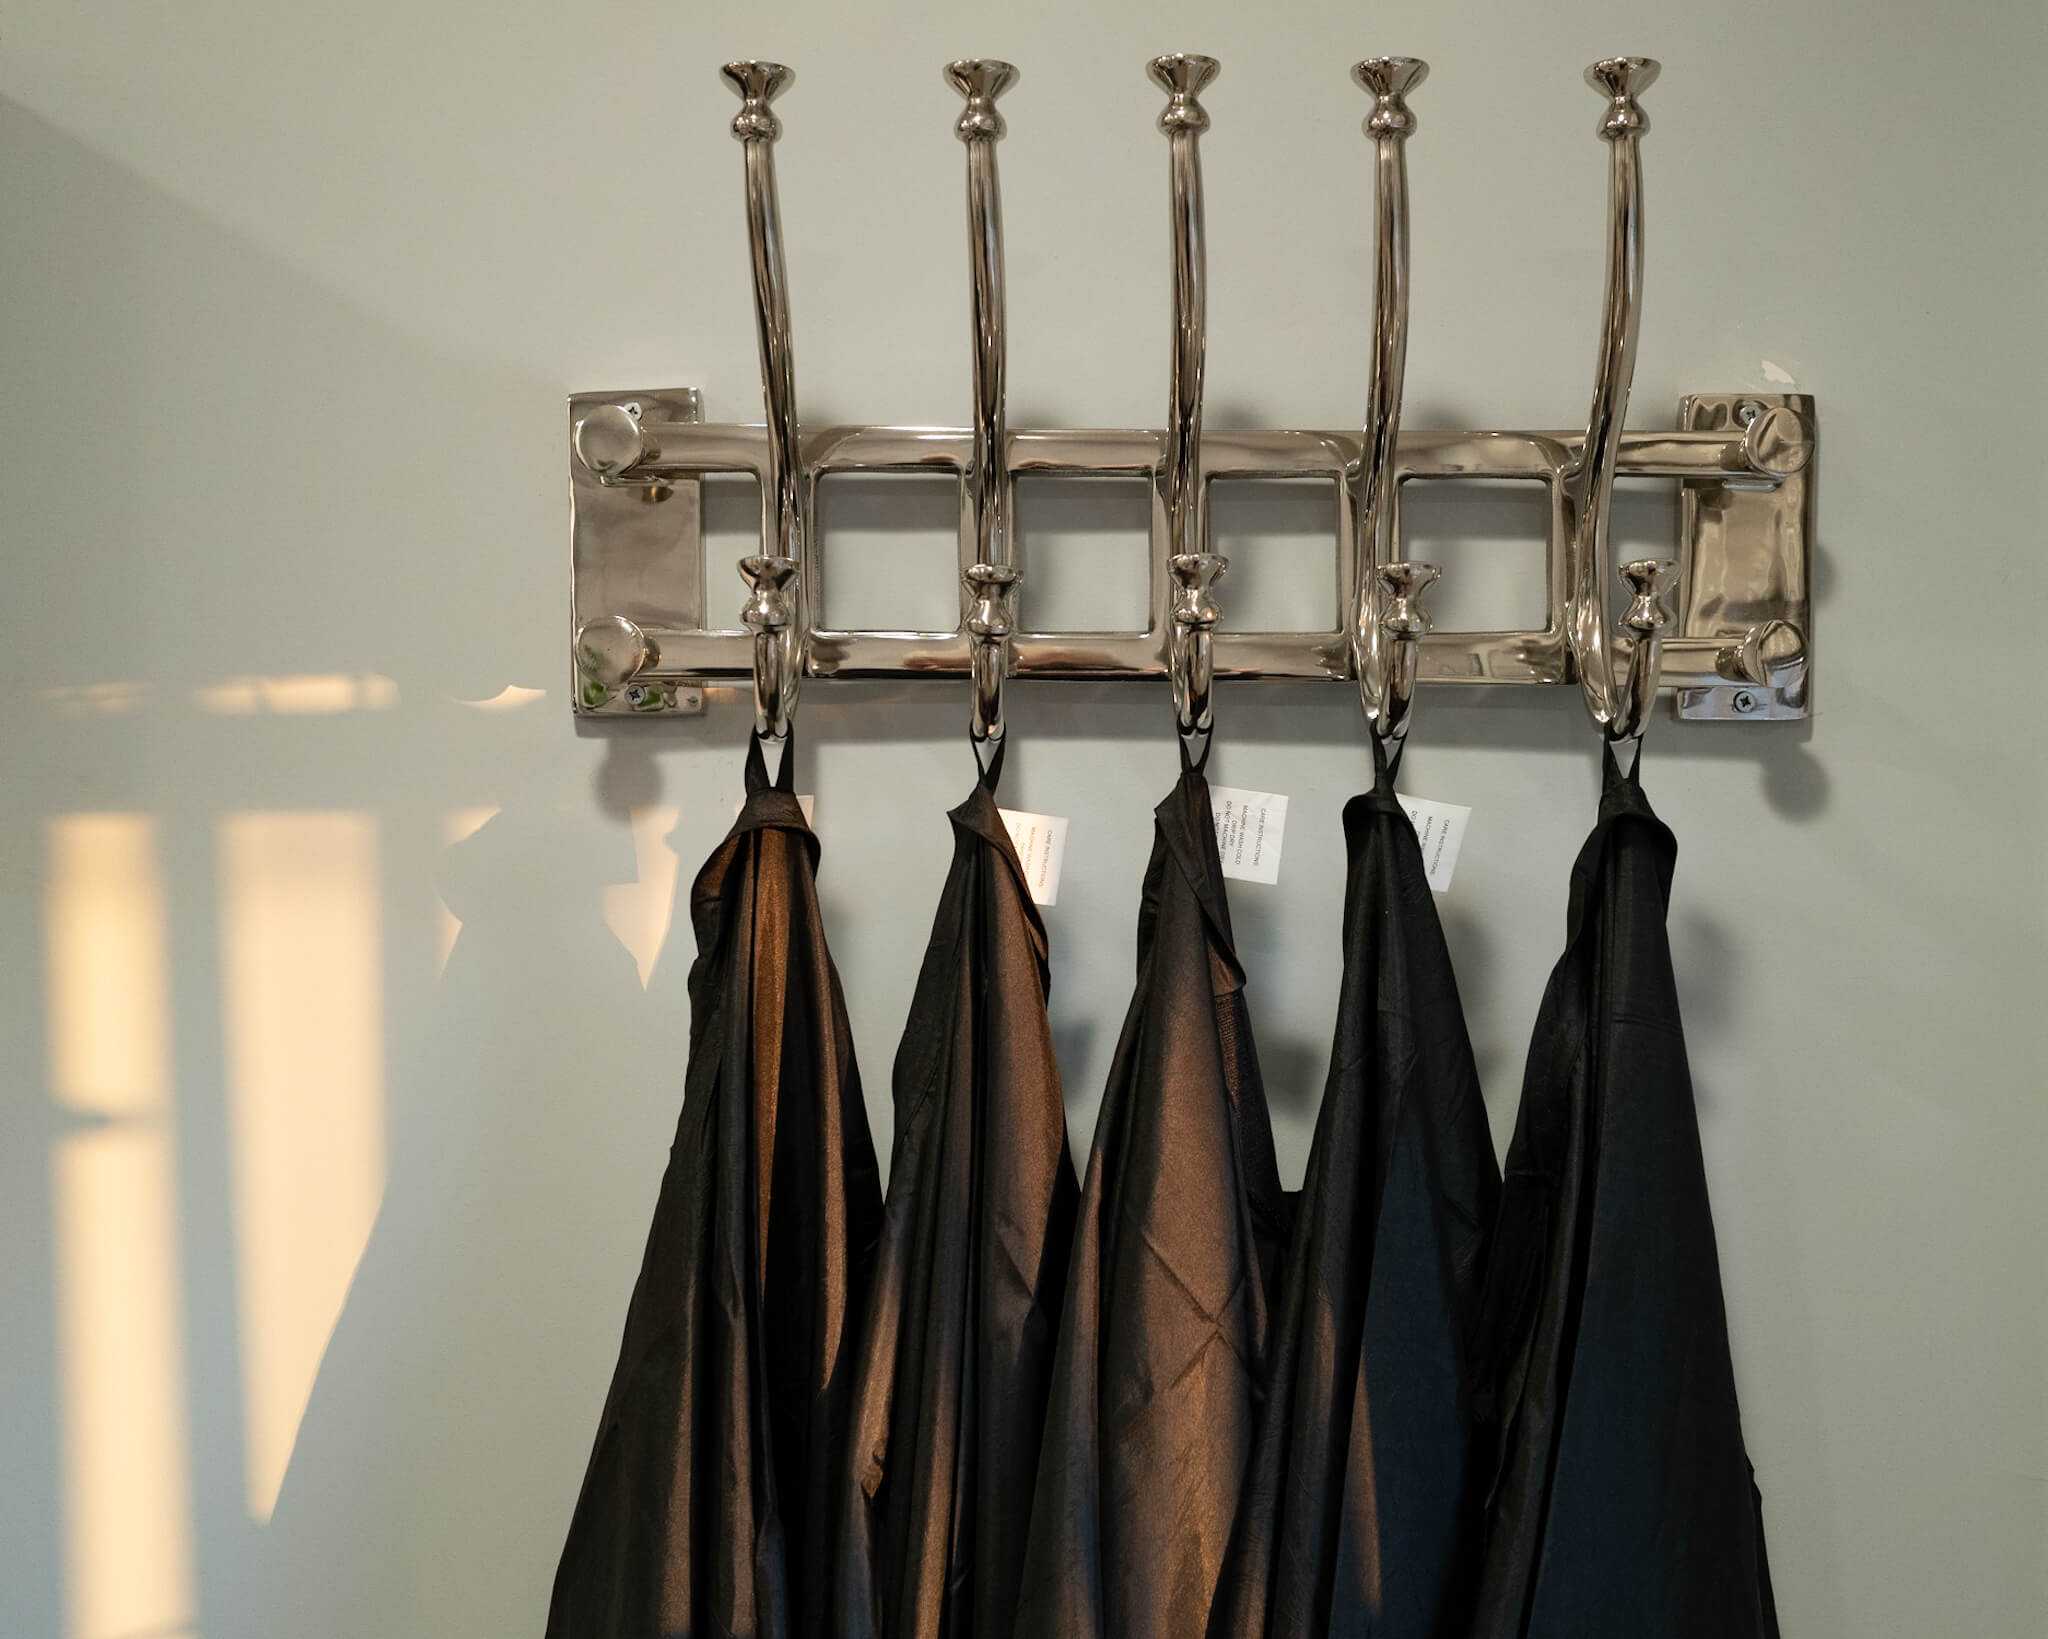 Hairdressing gowns hanging on a rack